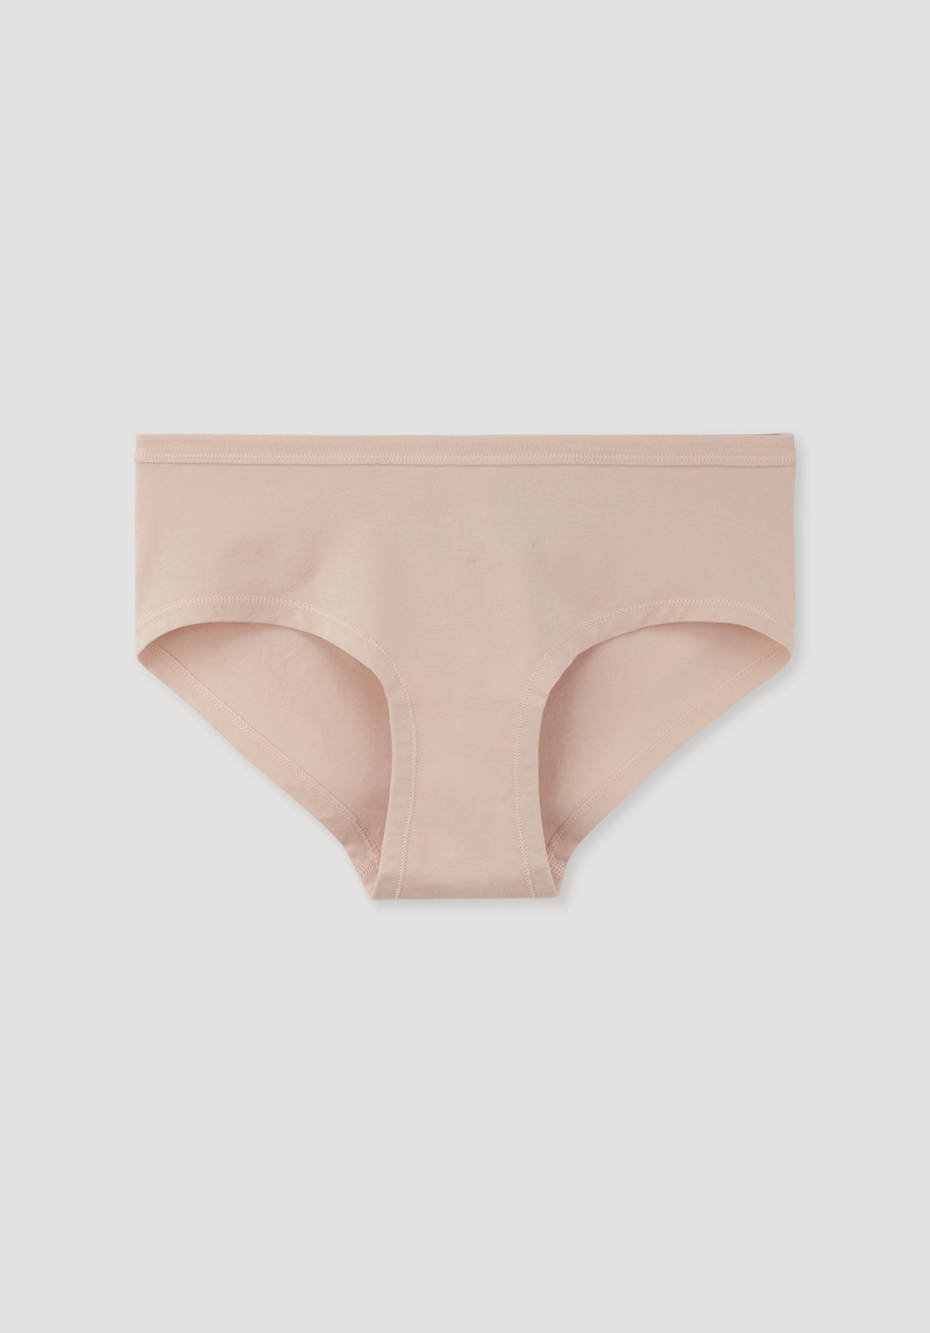 Panties low cut in a pack of 2 made from pure organic cotton 5471809